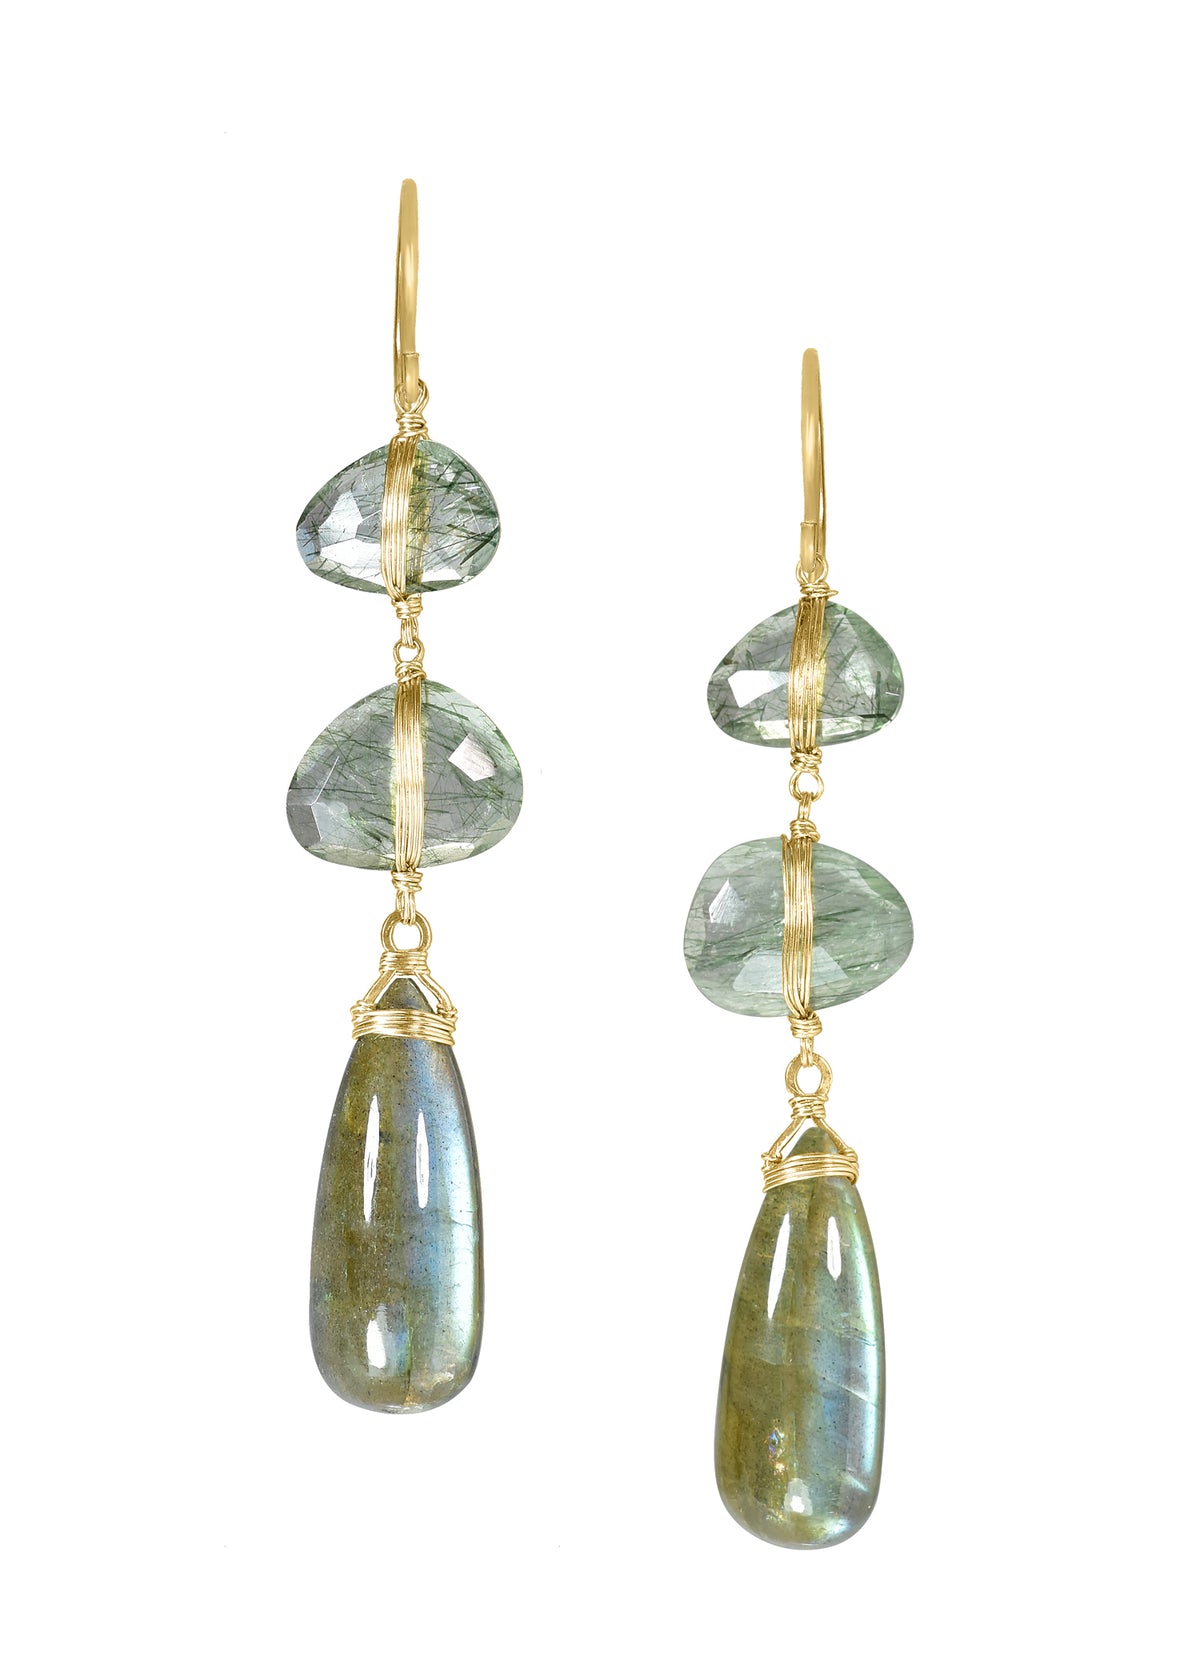 Green rutilated quartz labradorite 14k gold Limited quantities. Special order only. Each pair varies slightly. Handmade in our Los Angeles studio